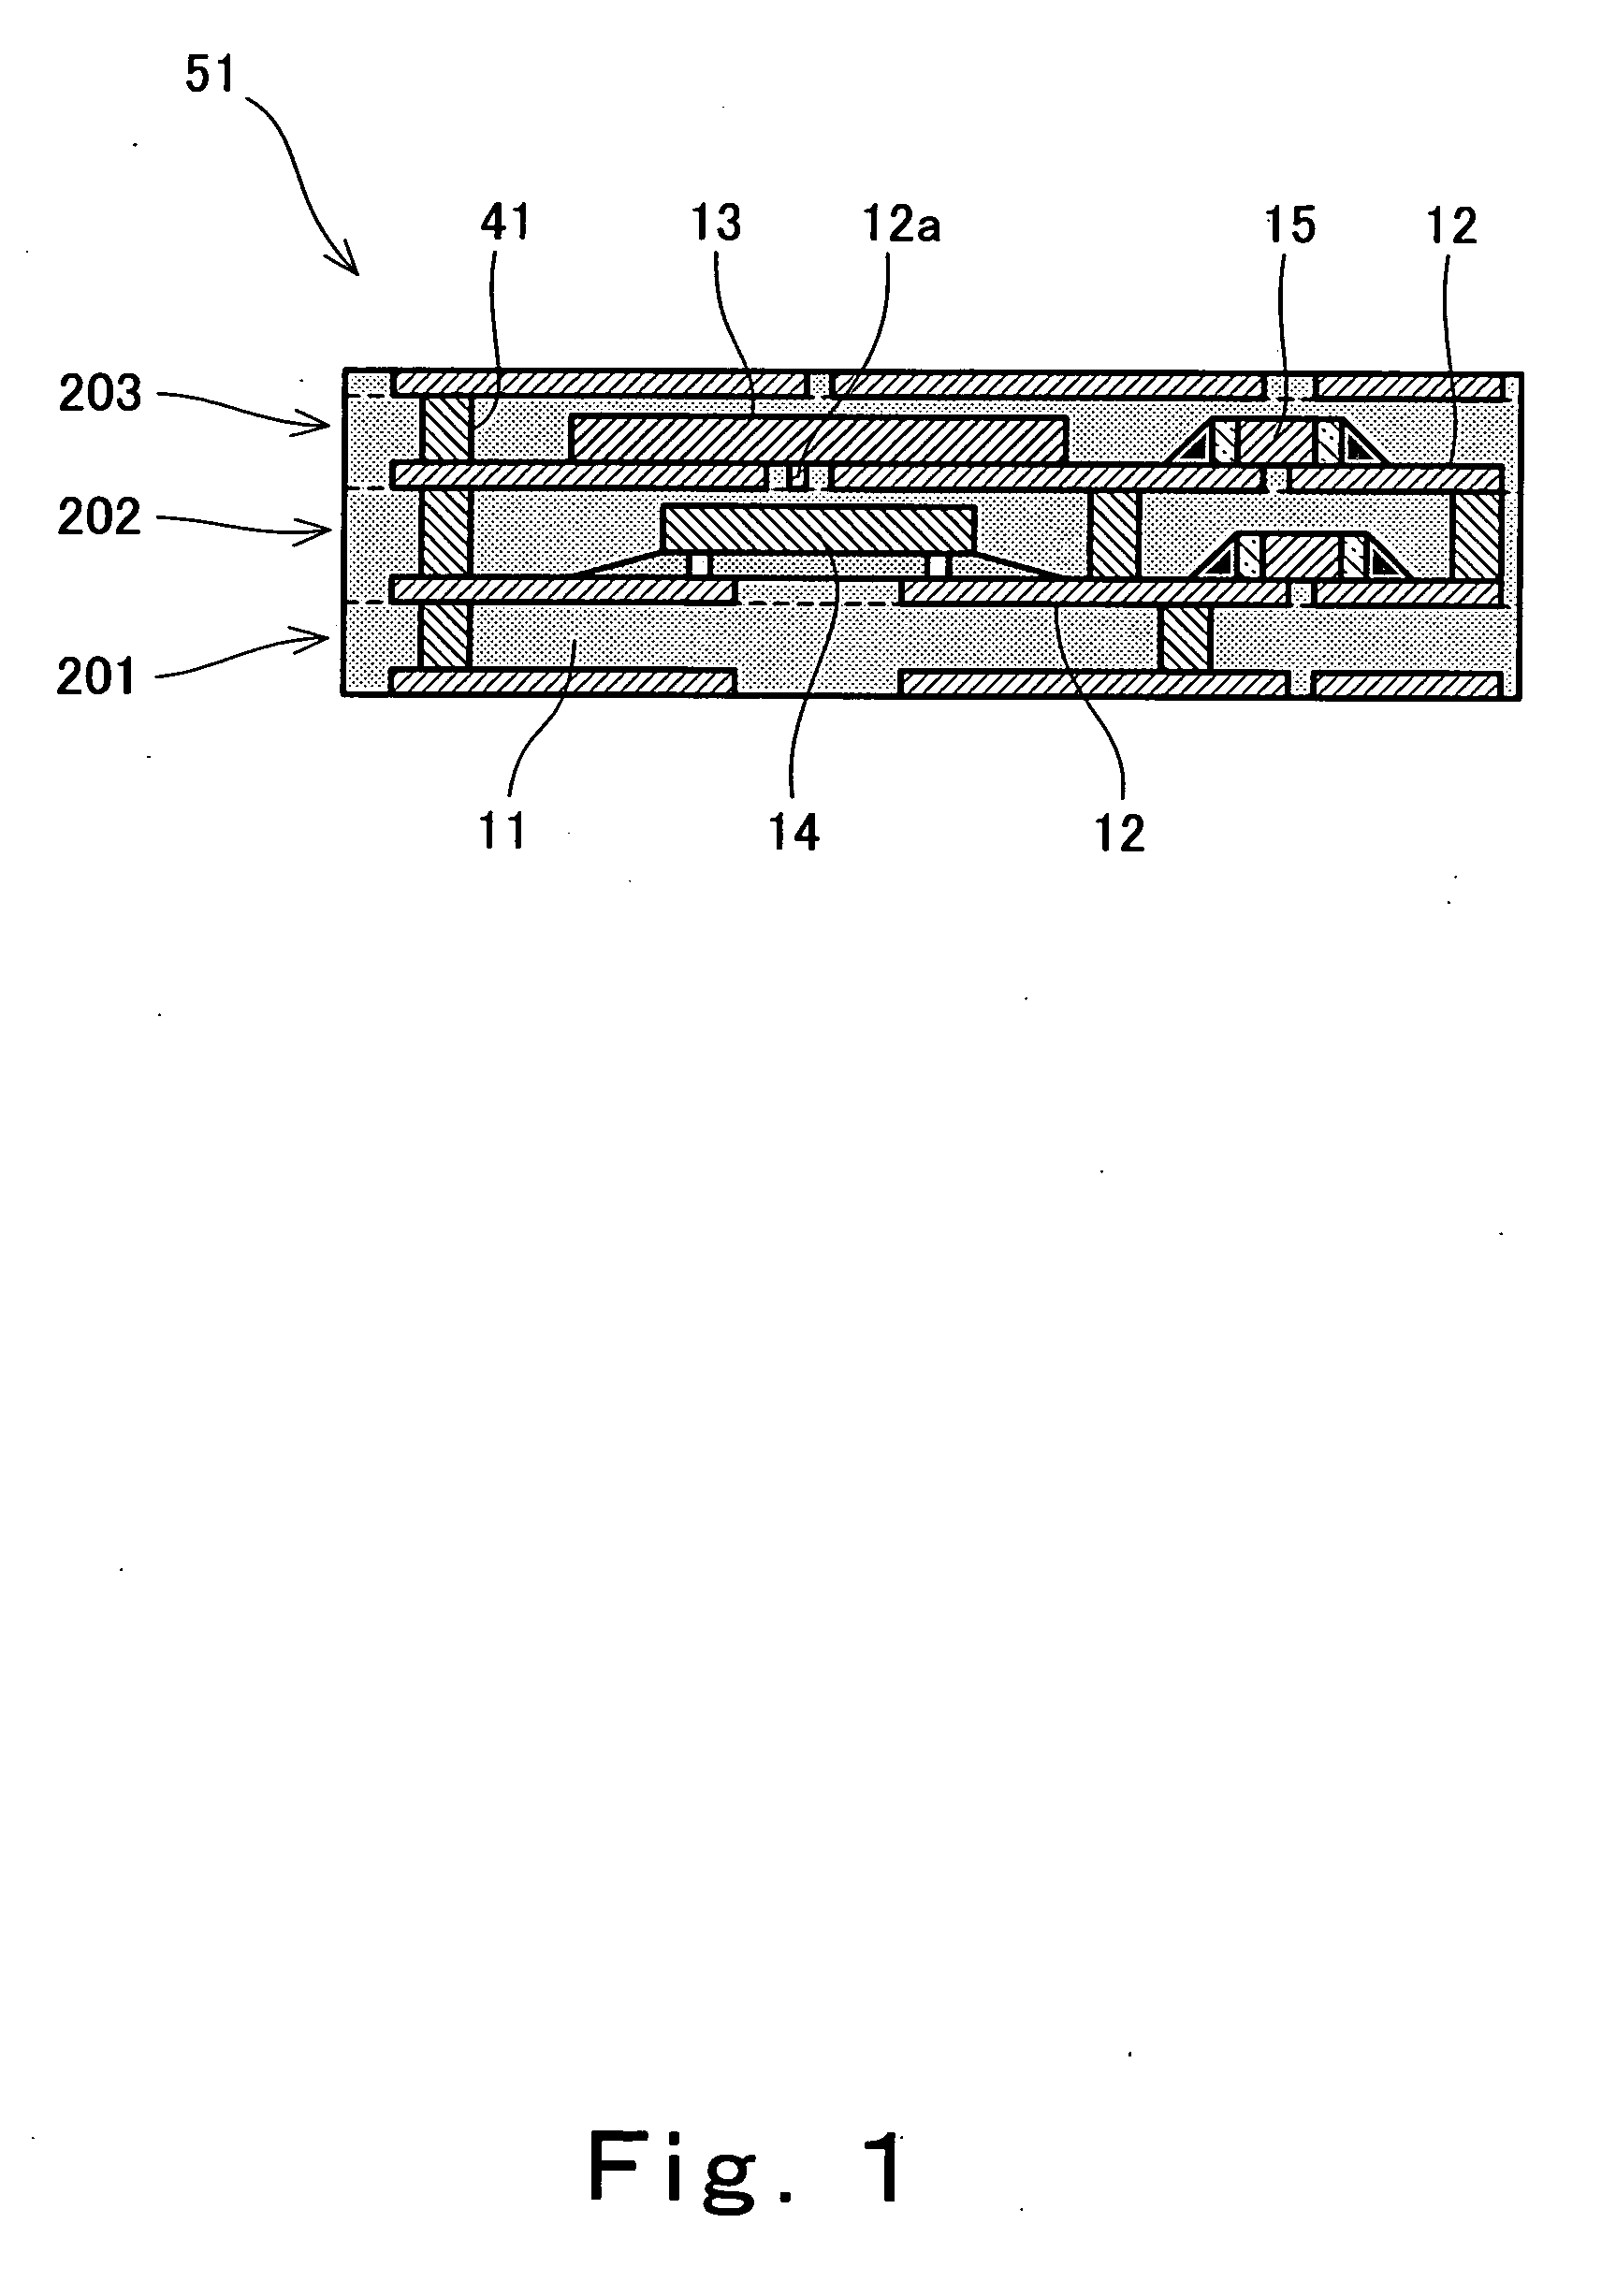 Module with built-in circuit elements